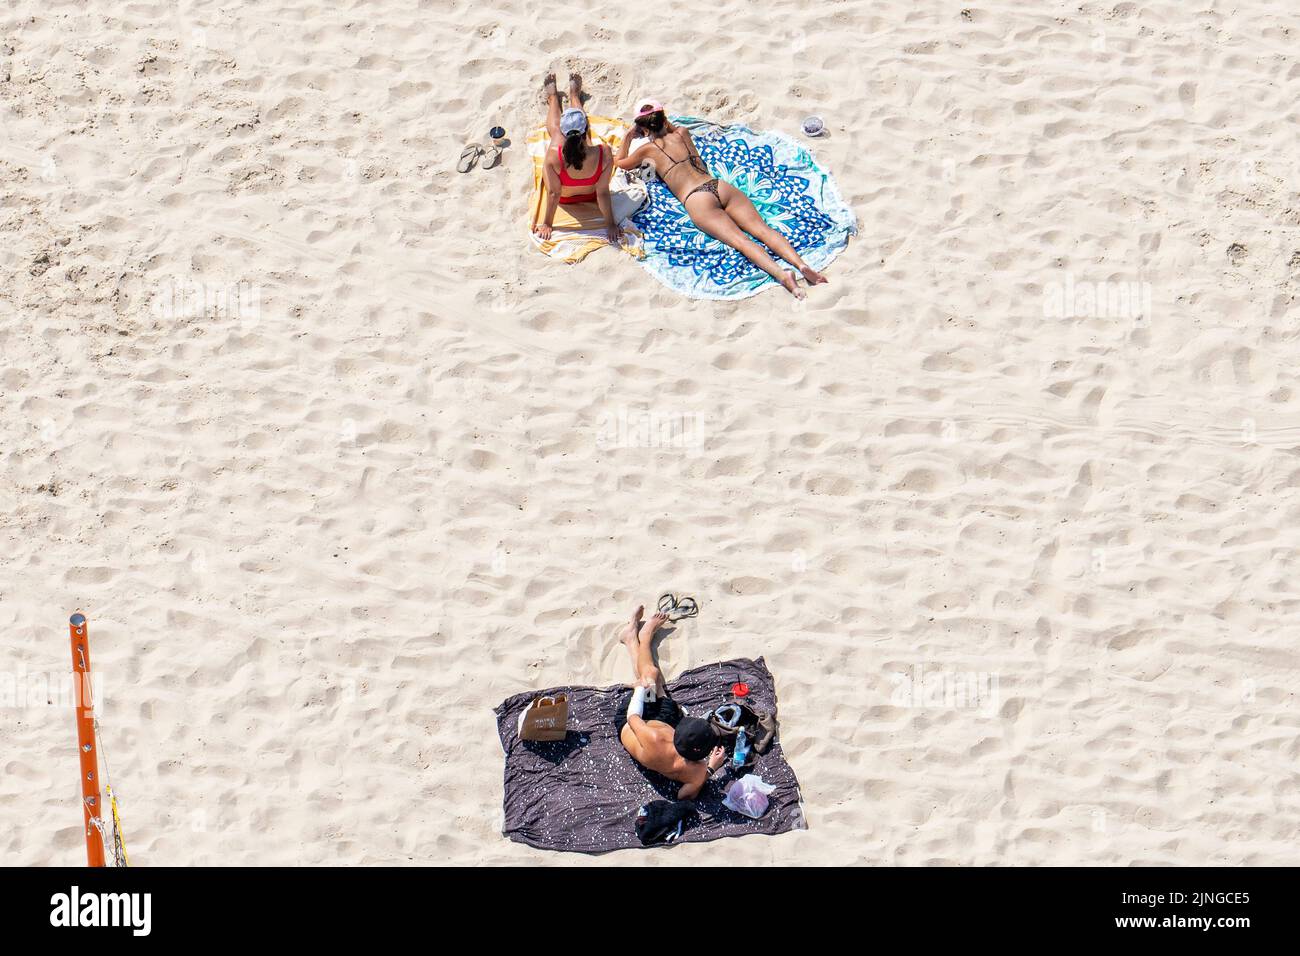 Beach goers enjoy summertime in Tel Aviv. Tel Aviv, located along the Mediterranean coastline, is Israel's cultural hub and a major travel destination that attracts tourists from around the world. Stock Photo